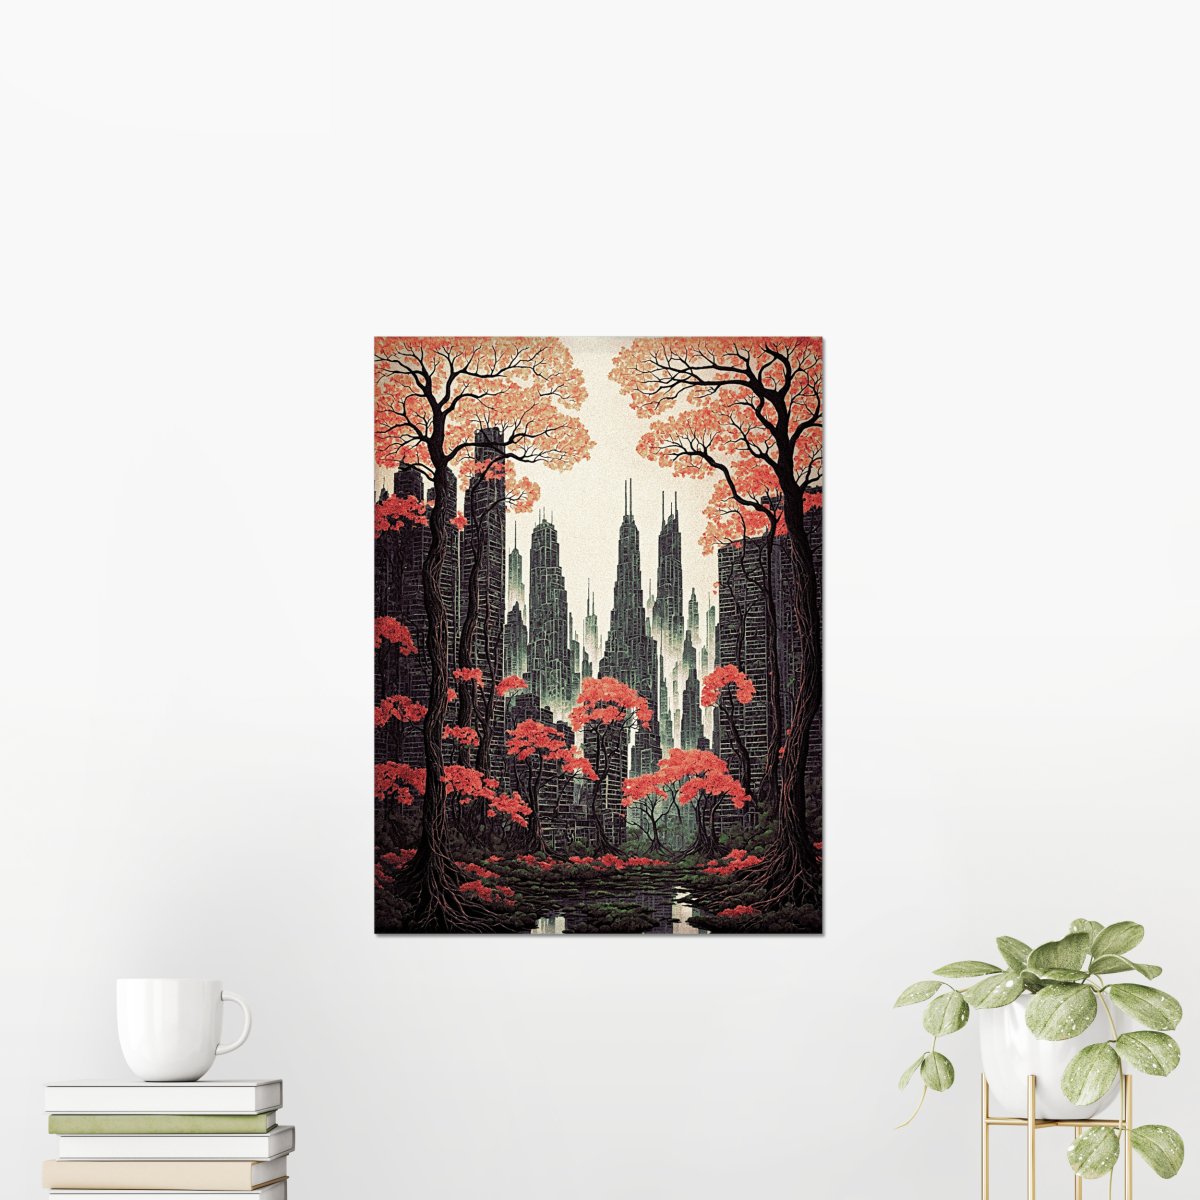 Downtown apocalypse - Art print - Poster - Ever colorful